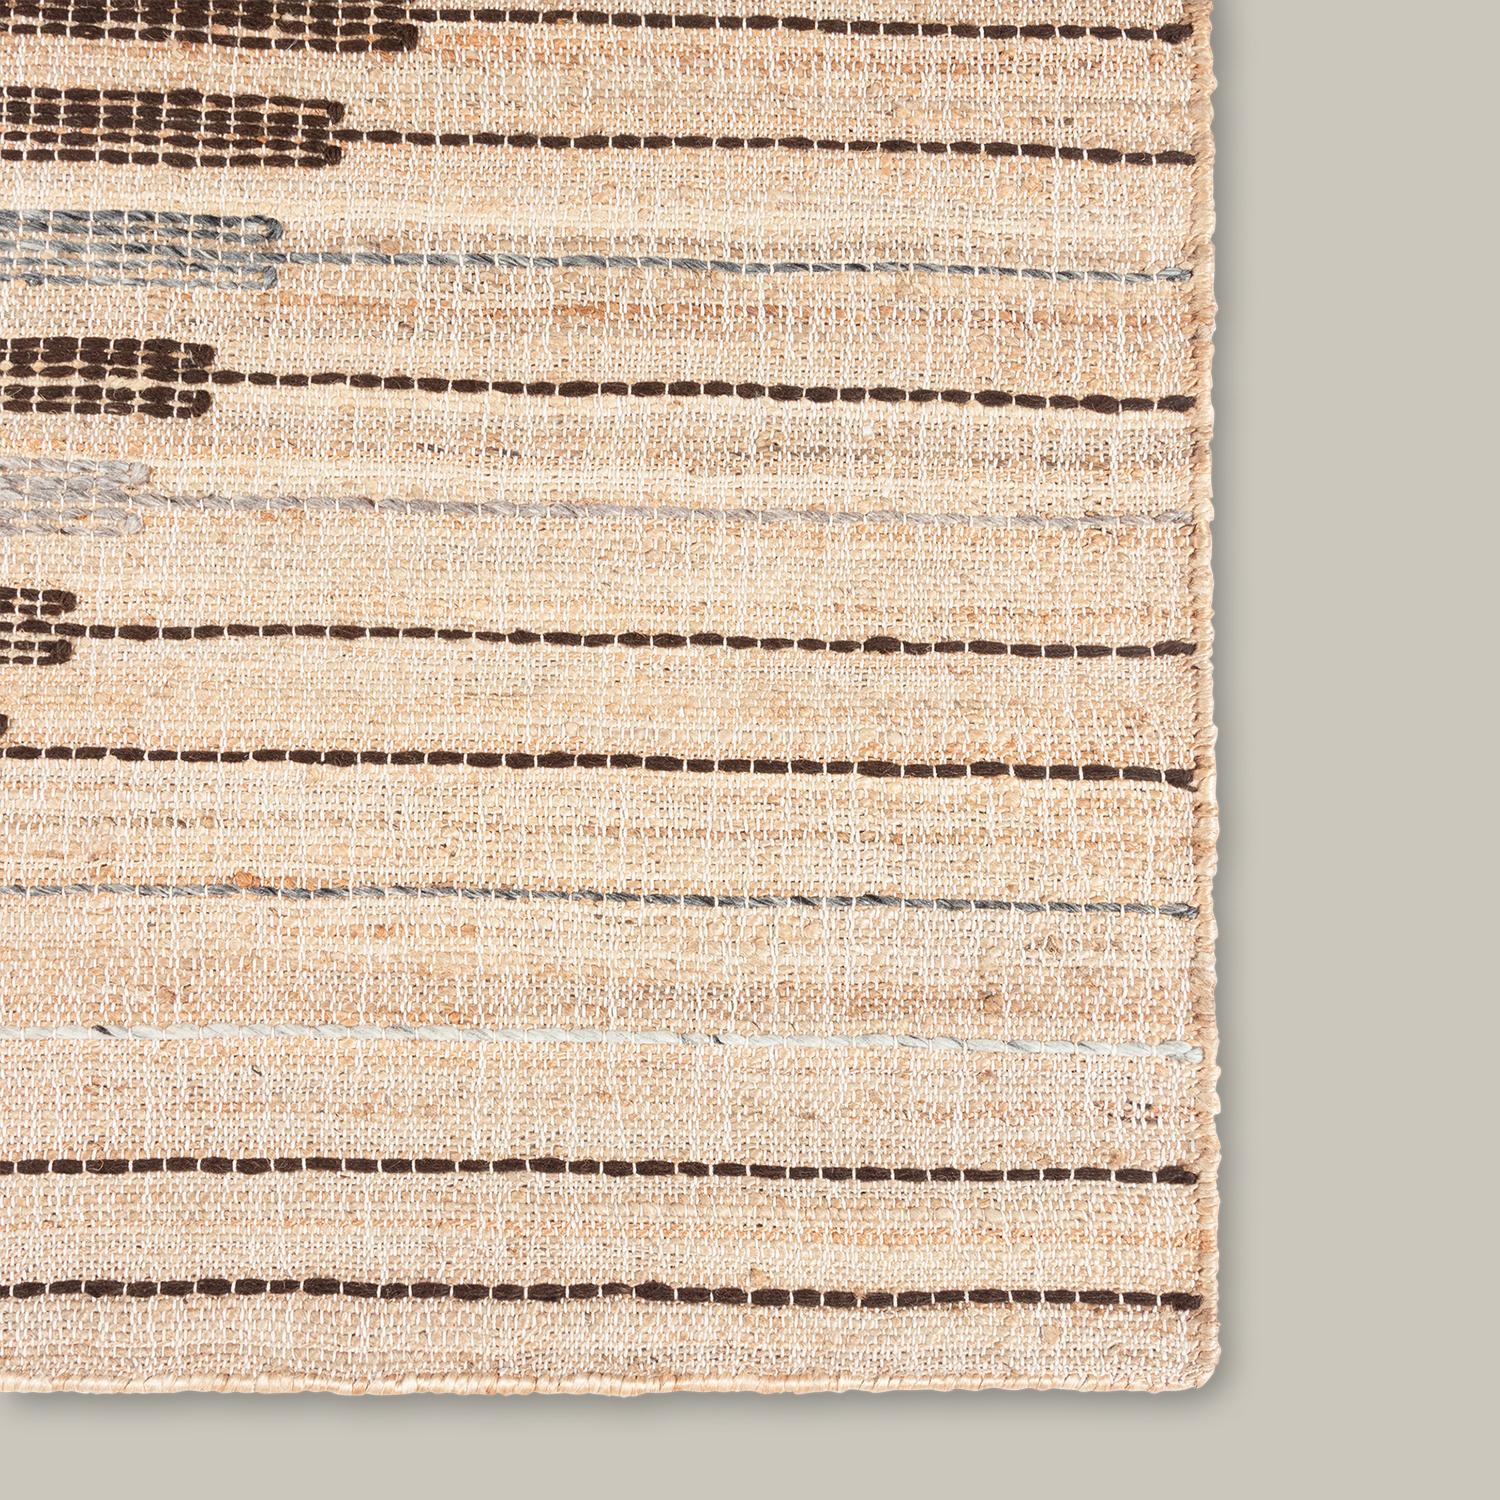 “Argan Dimbokro” African Mud cloth-Inspired Rug by Christiane Lemieux In New Condition For Sale In New York, NY